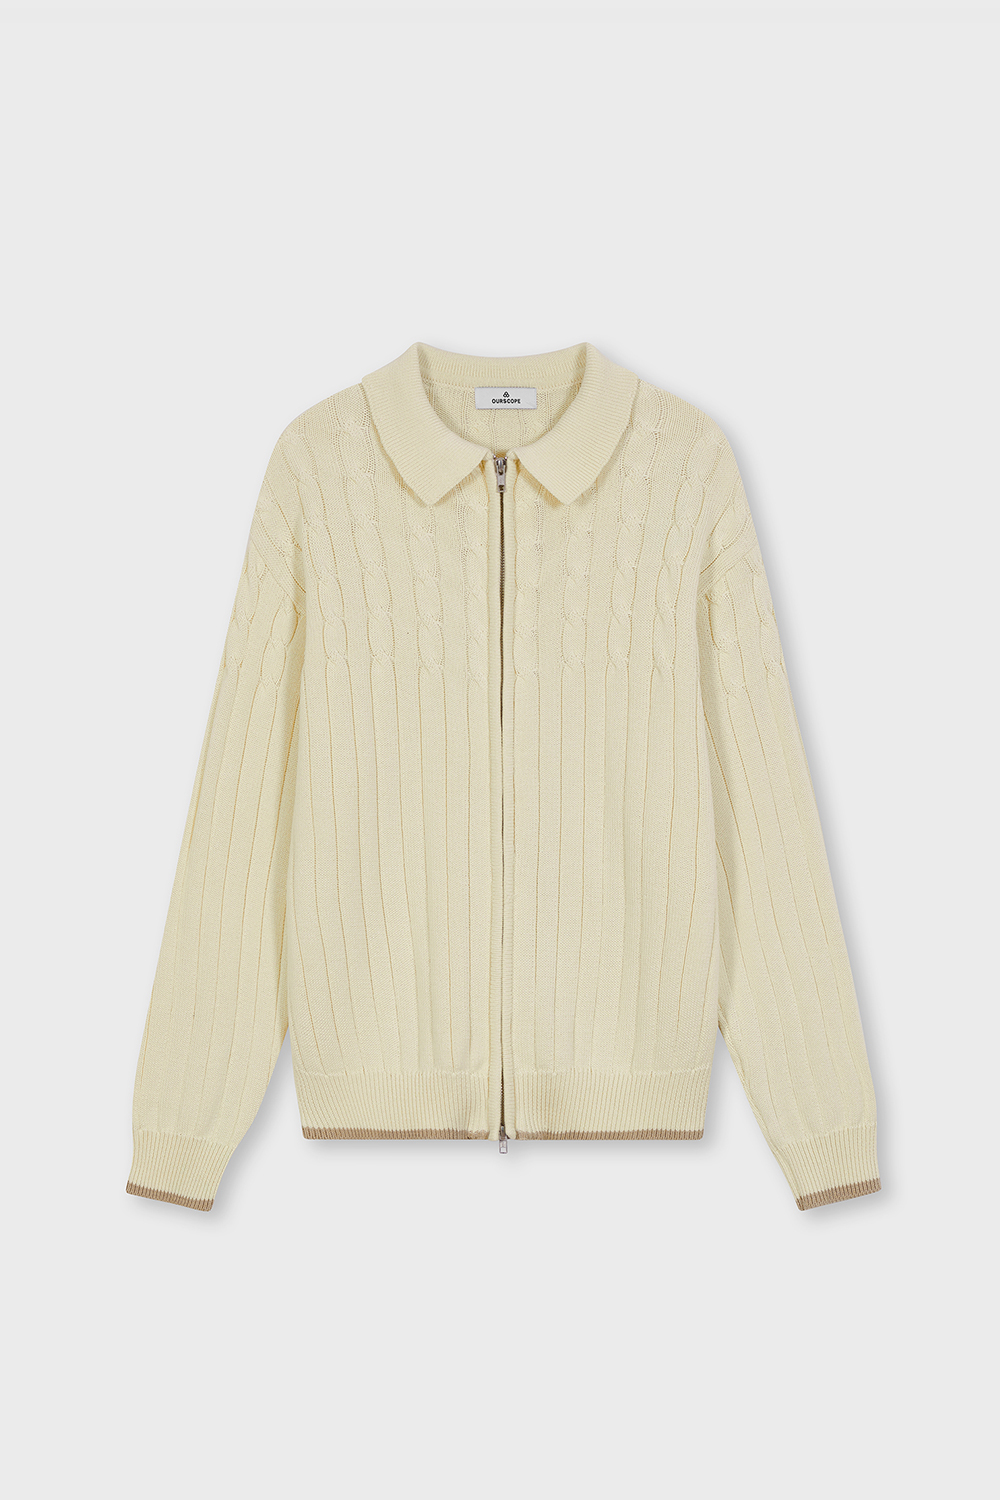 Cano Cable Zip-up Knit (Cream)